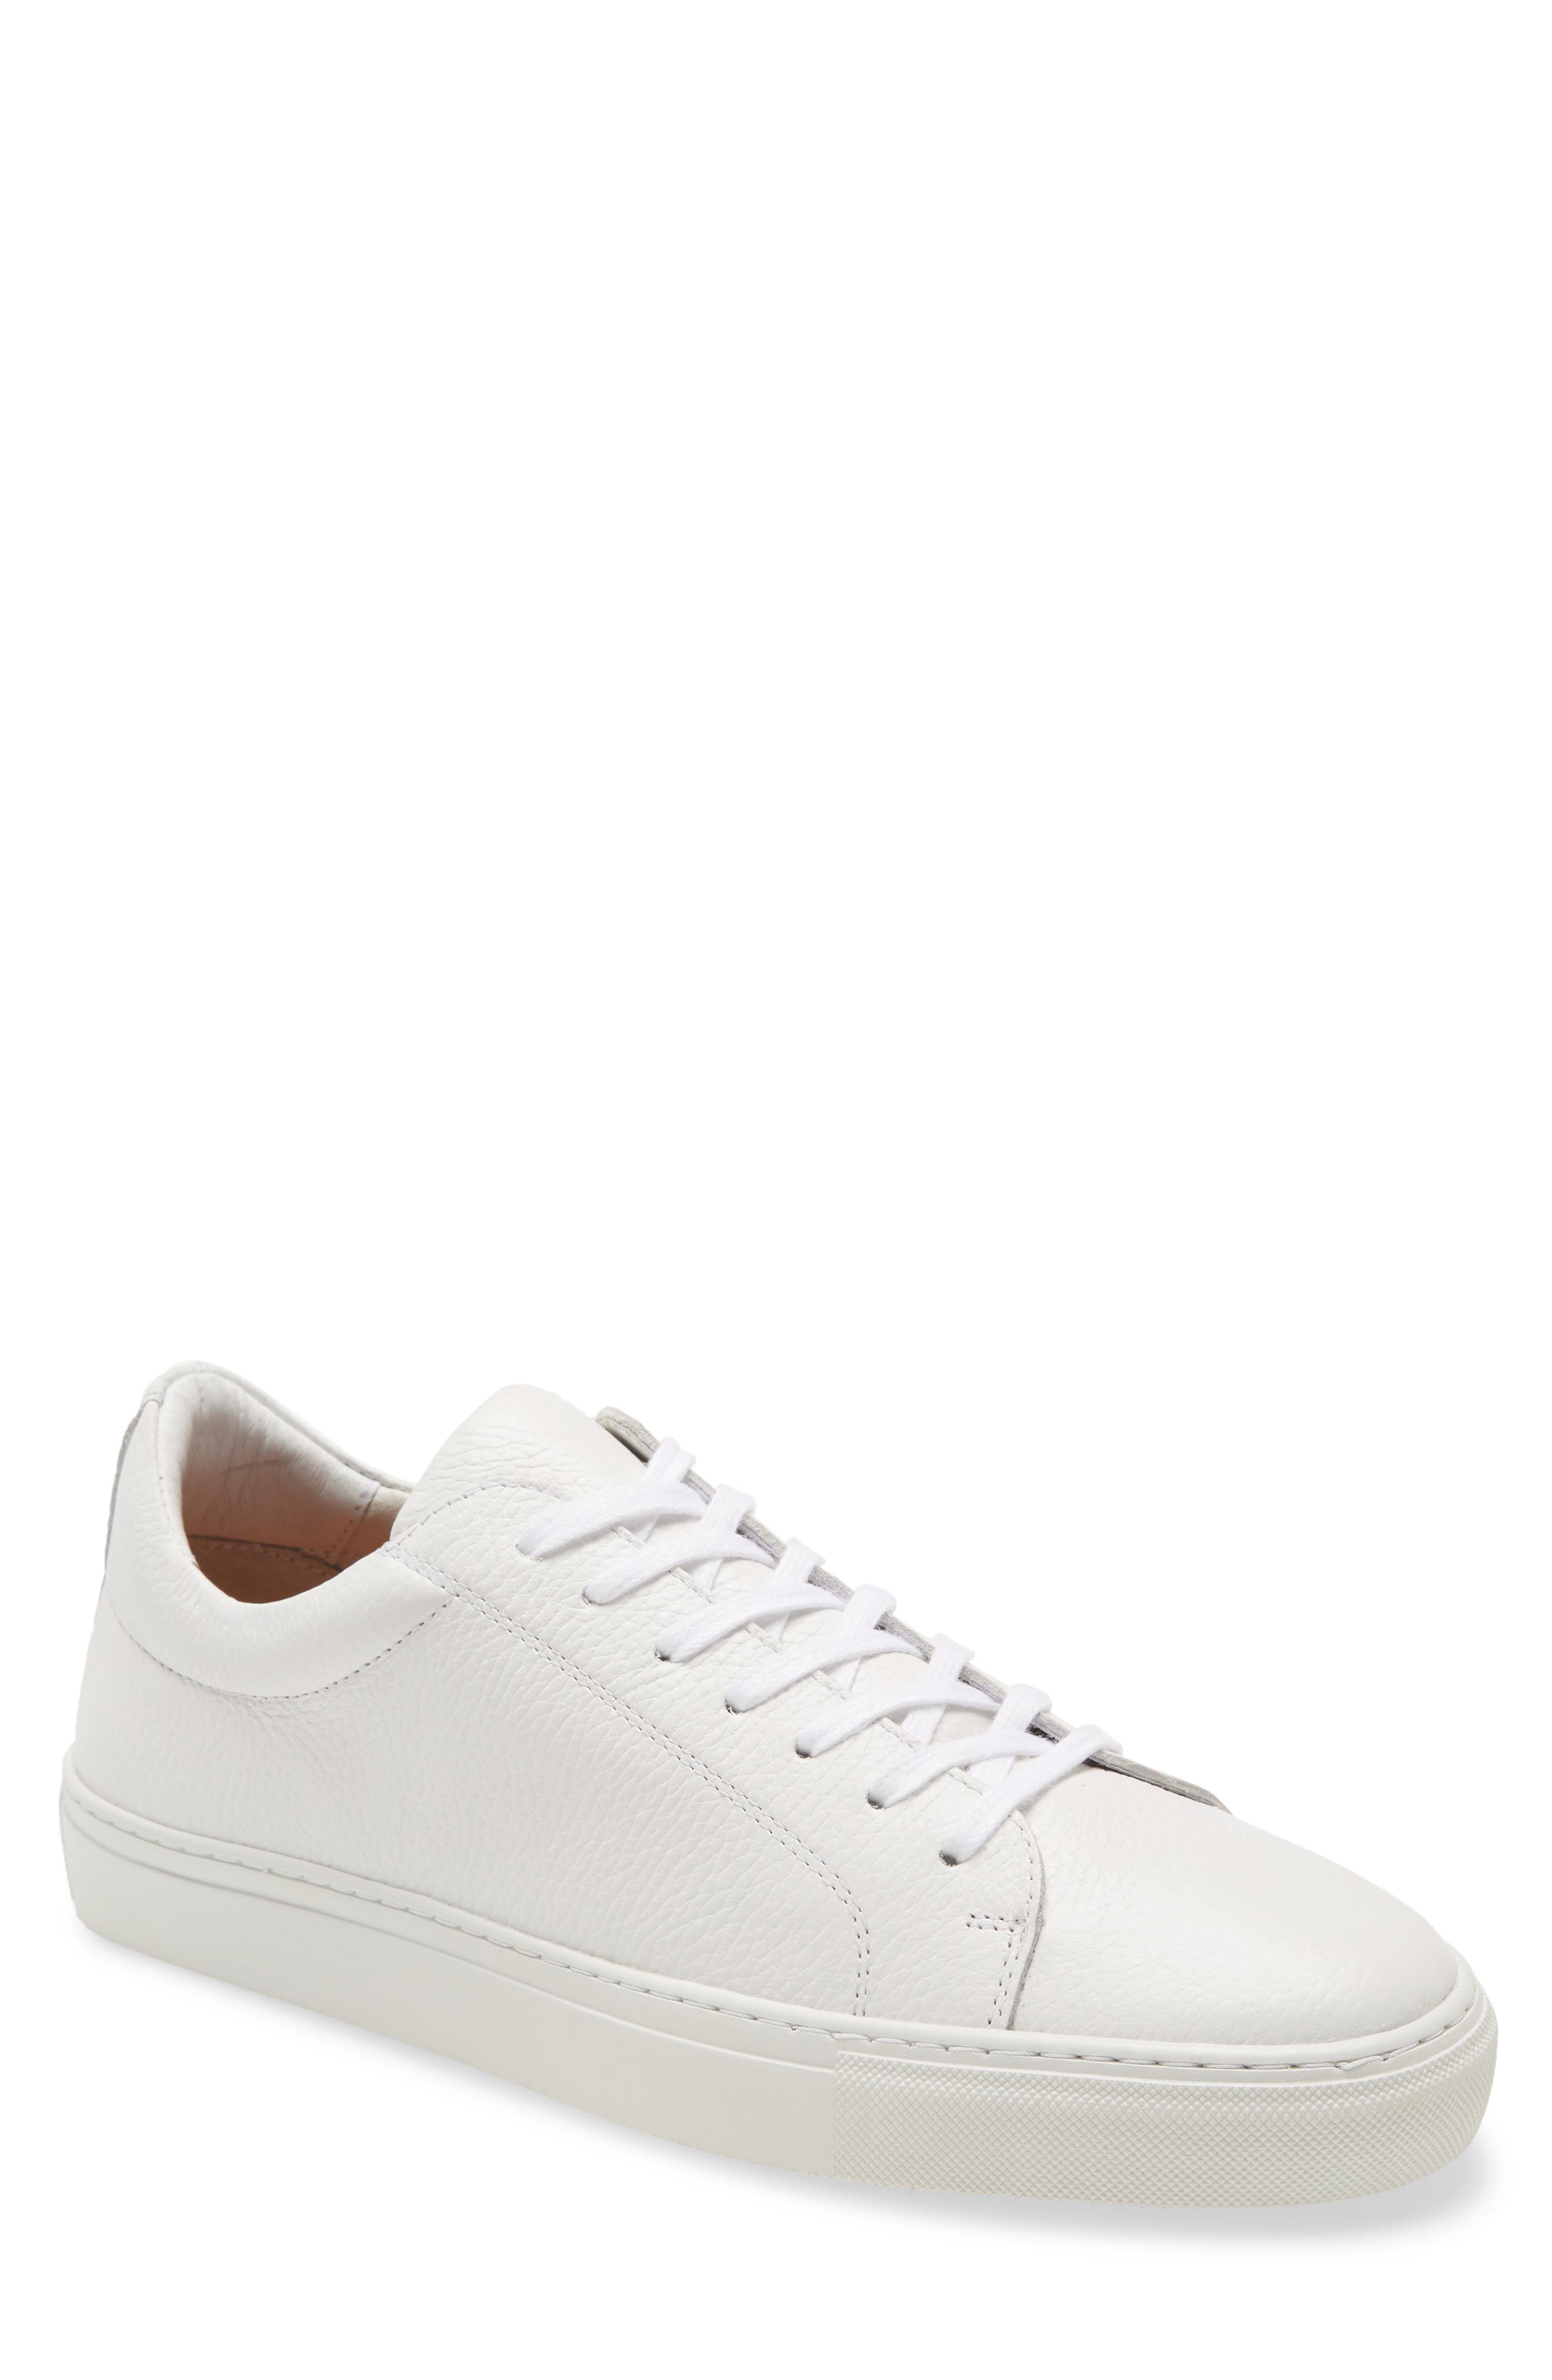 Supply Lab Damian Lace Up Sneaker In White Tumbled Leather